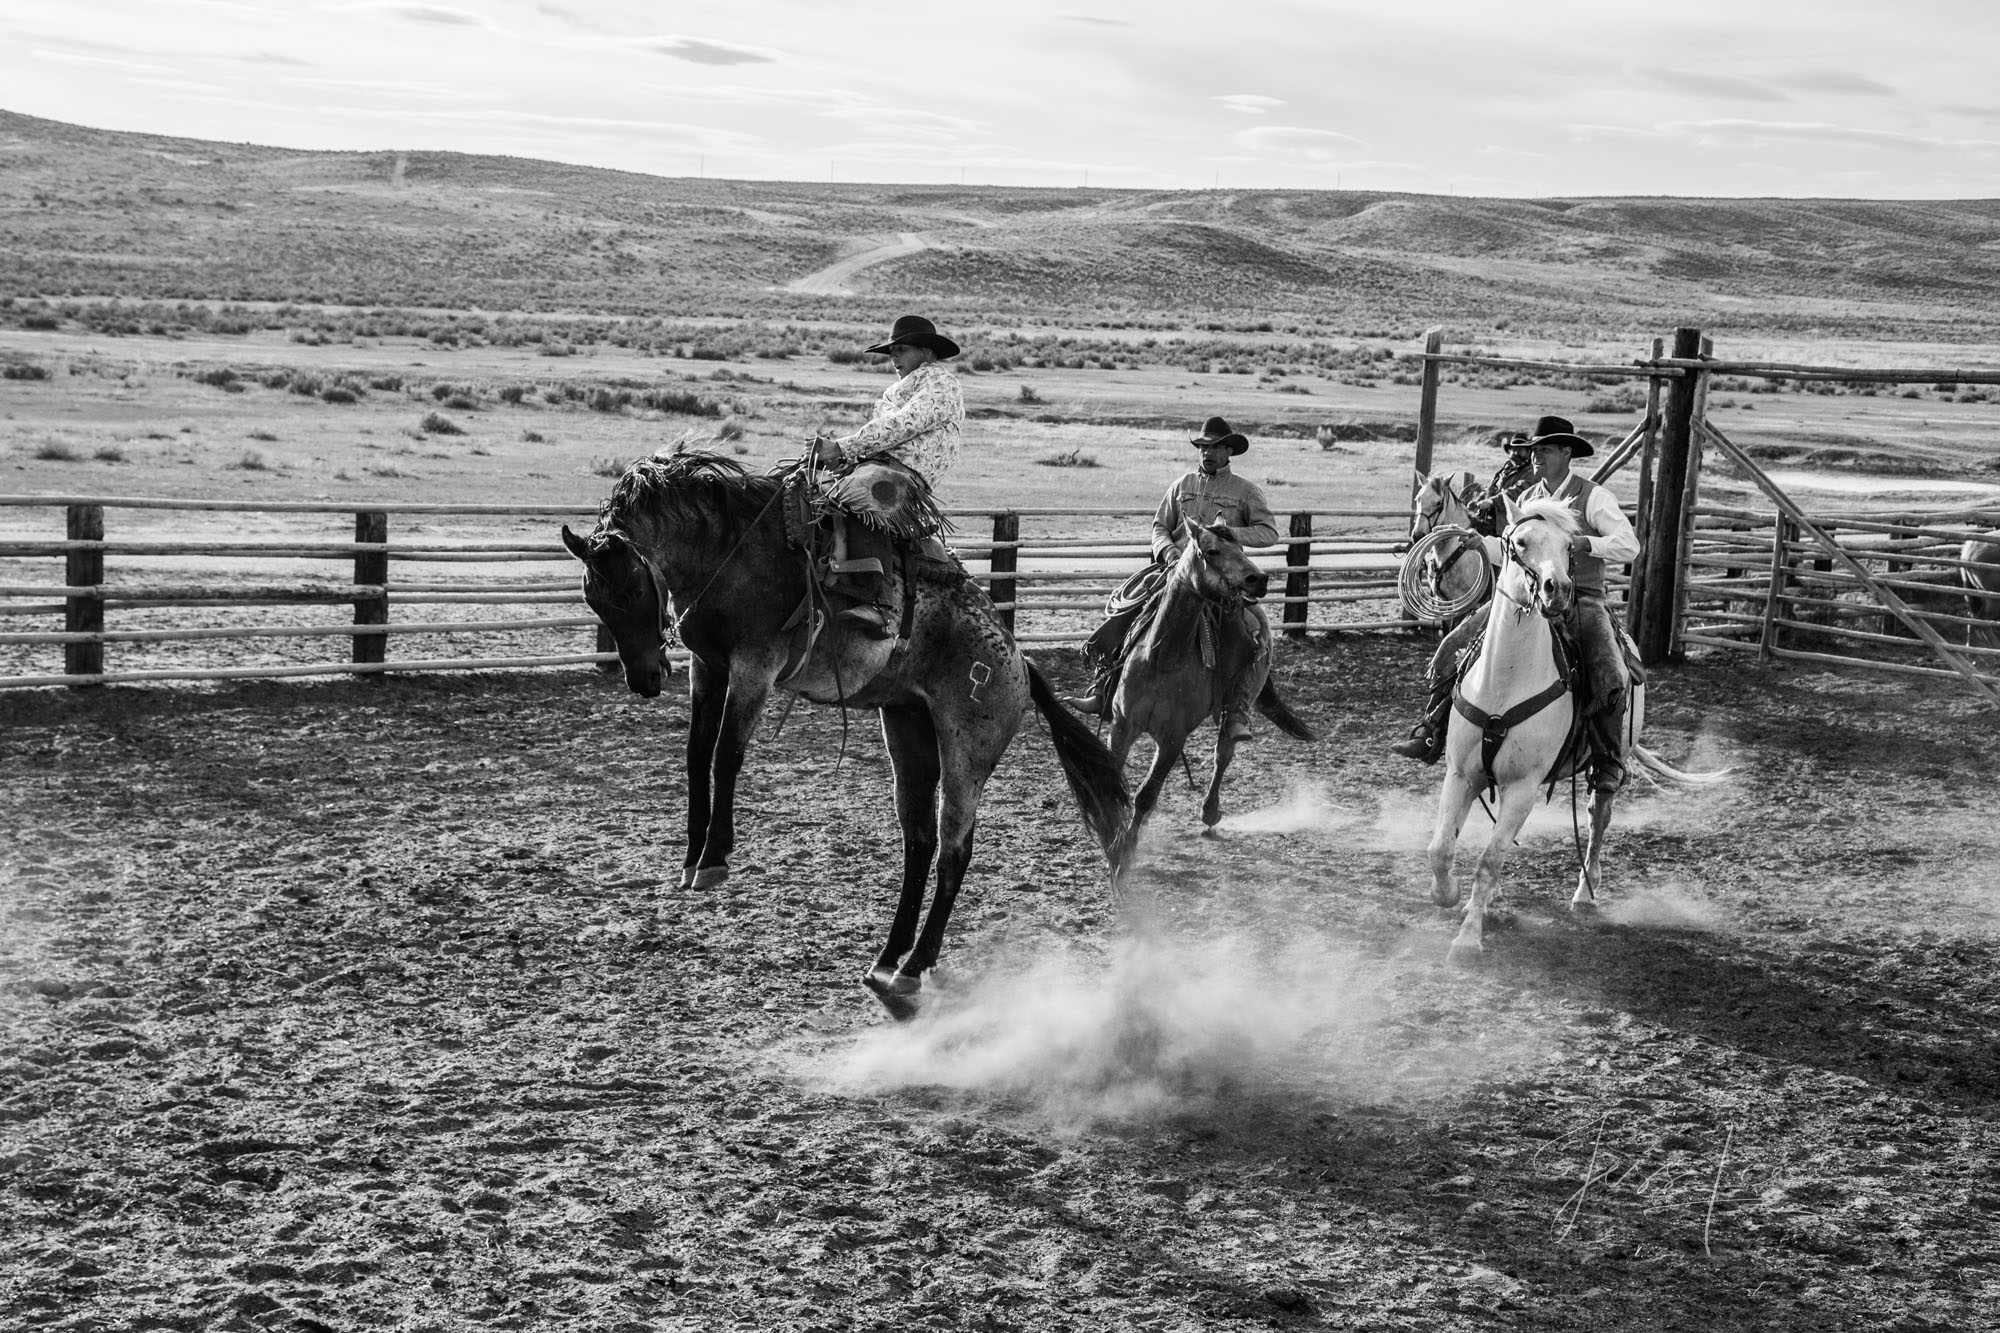 Fine Art Limited Edition Photo Prints of Cowboys, Horses, and life in the West.  Cowboy pictures in black and white.  Breakout...